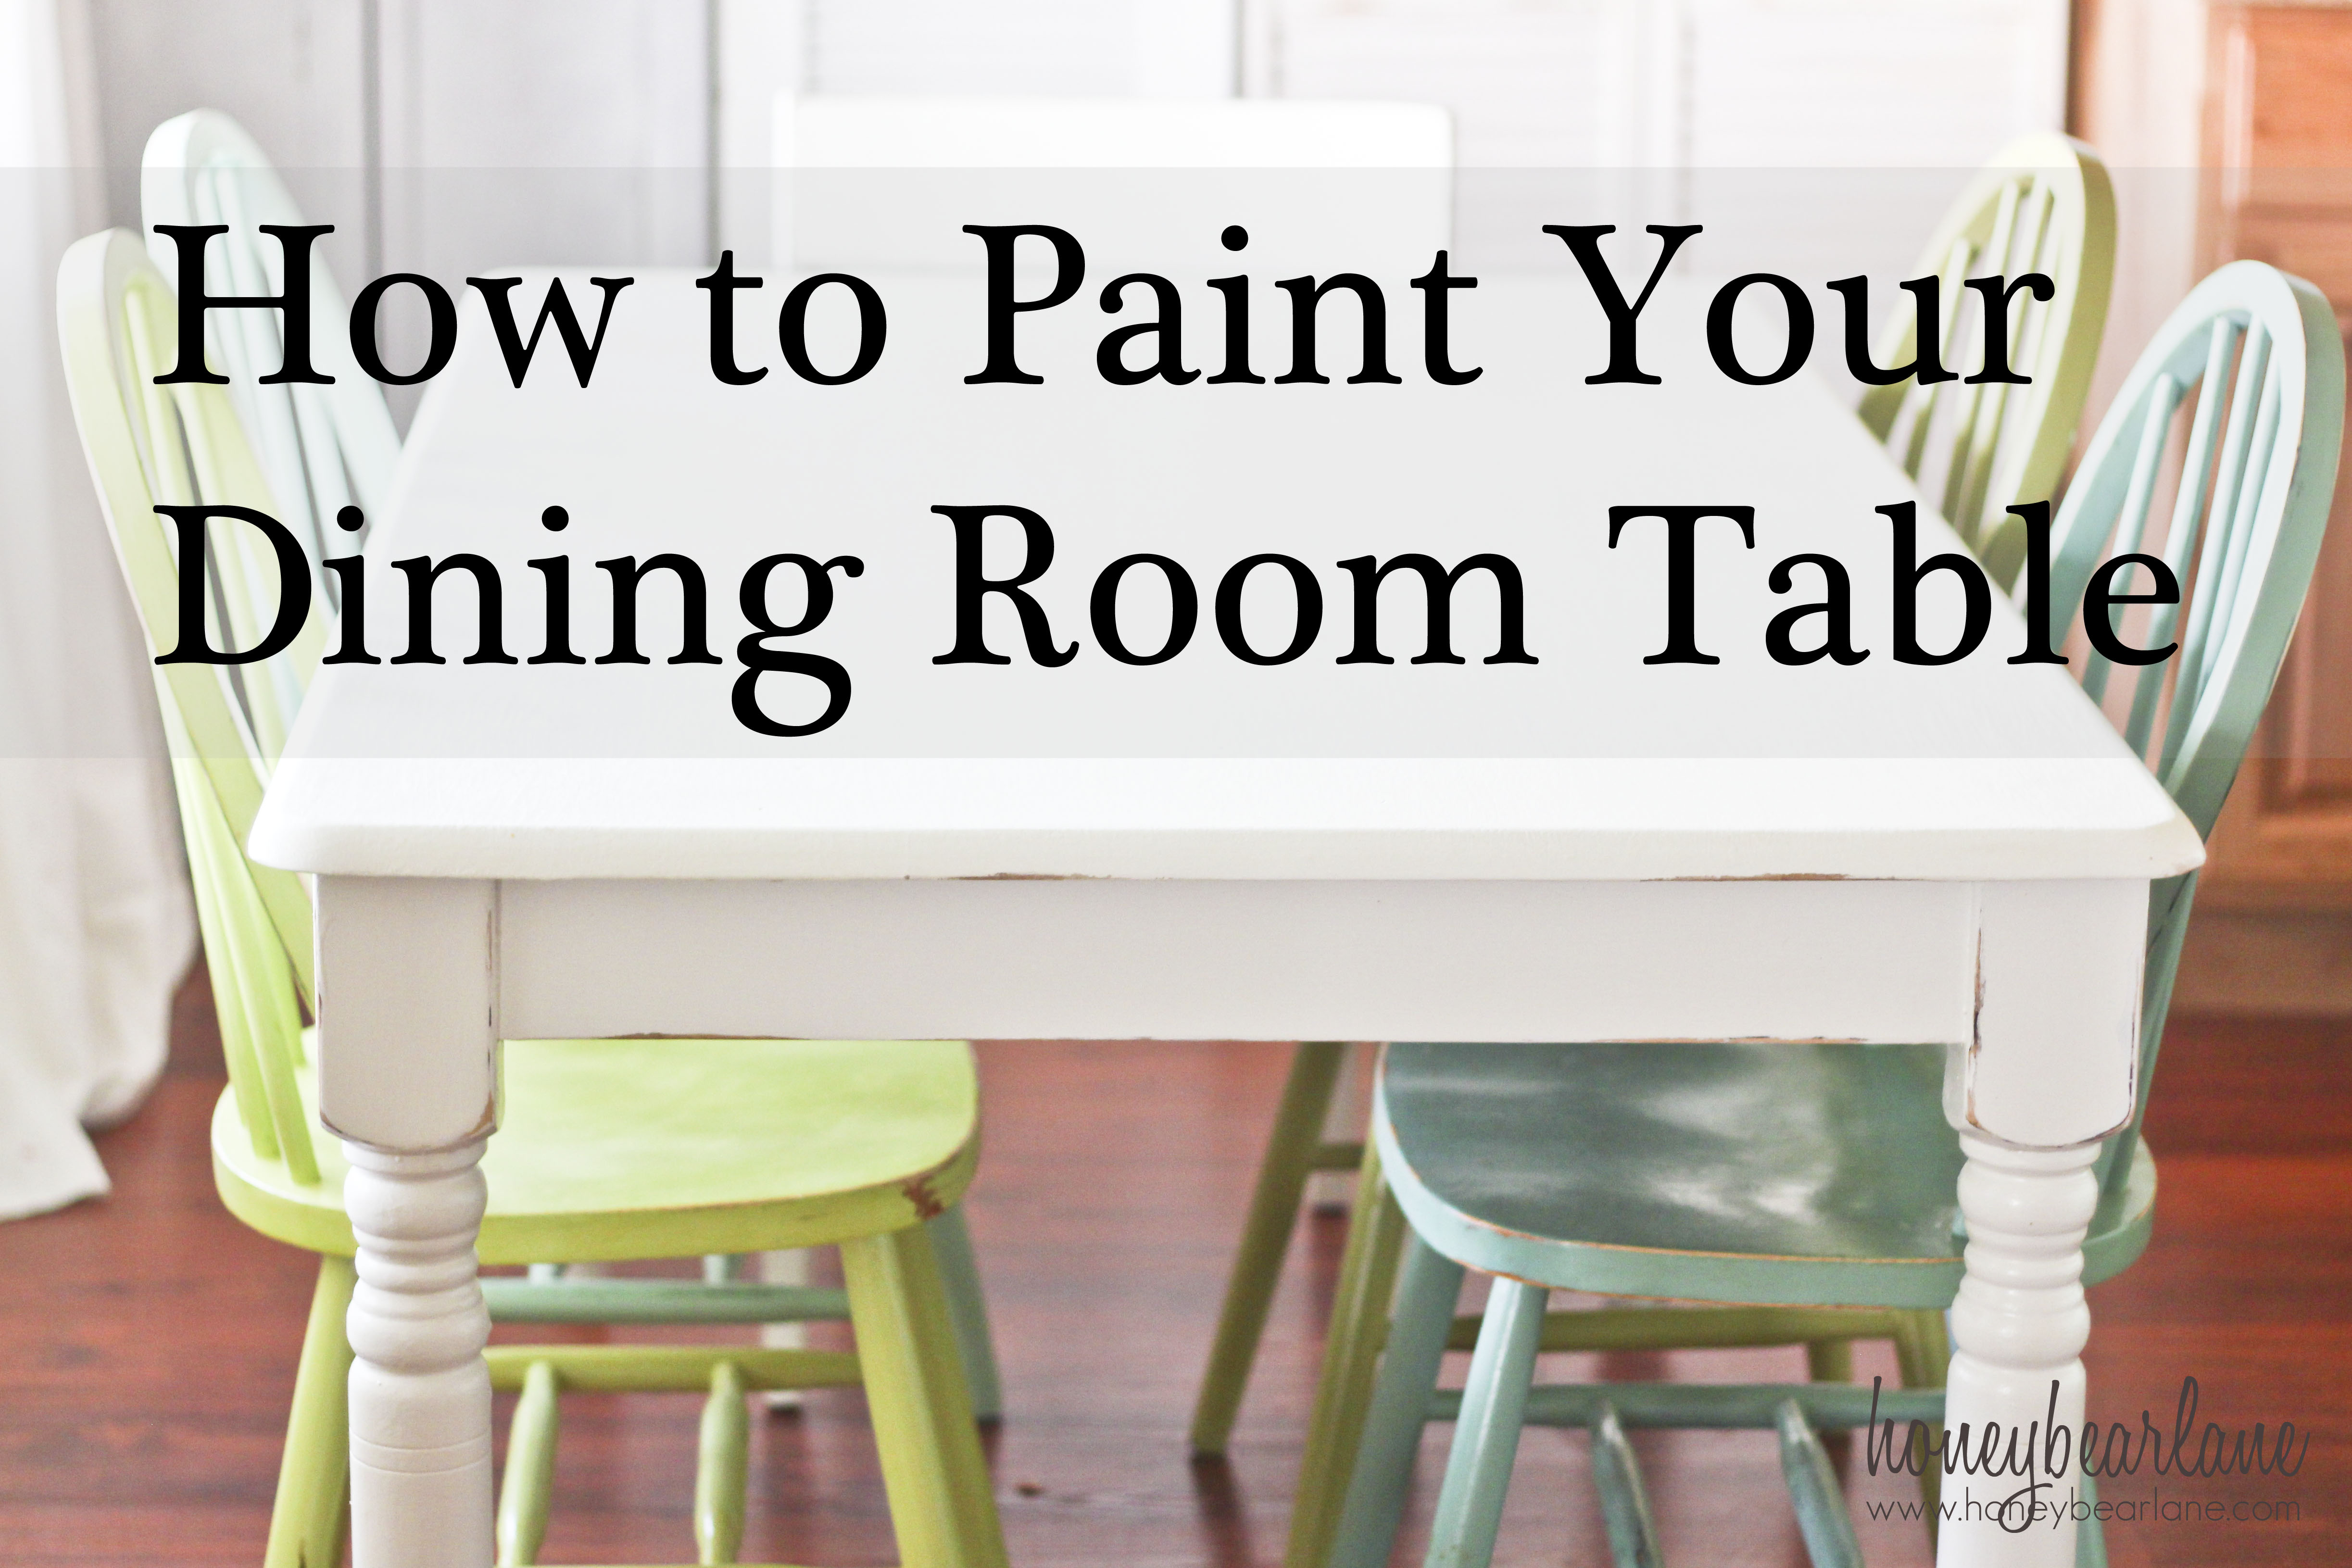 Painting In 3 Parts For Dining Room